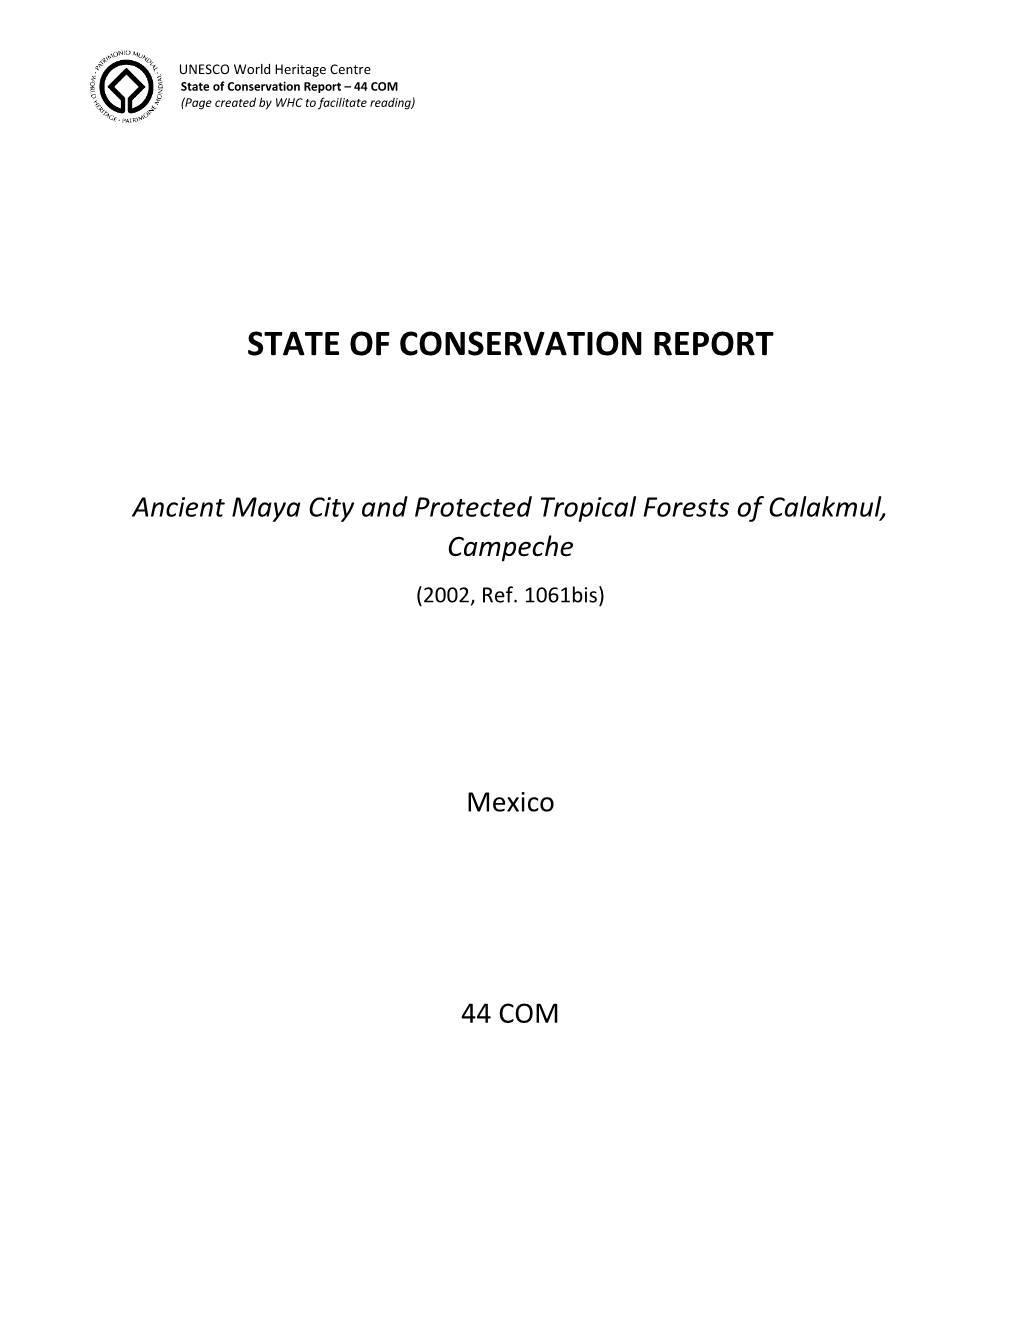 State of Conservation Report – 44 COM (Page Created by WHC to Facilitate Reading)